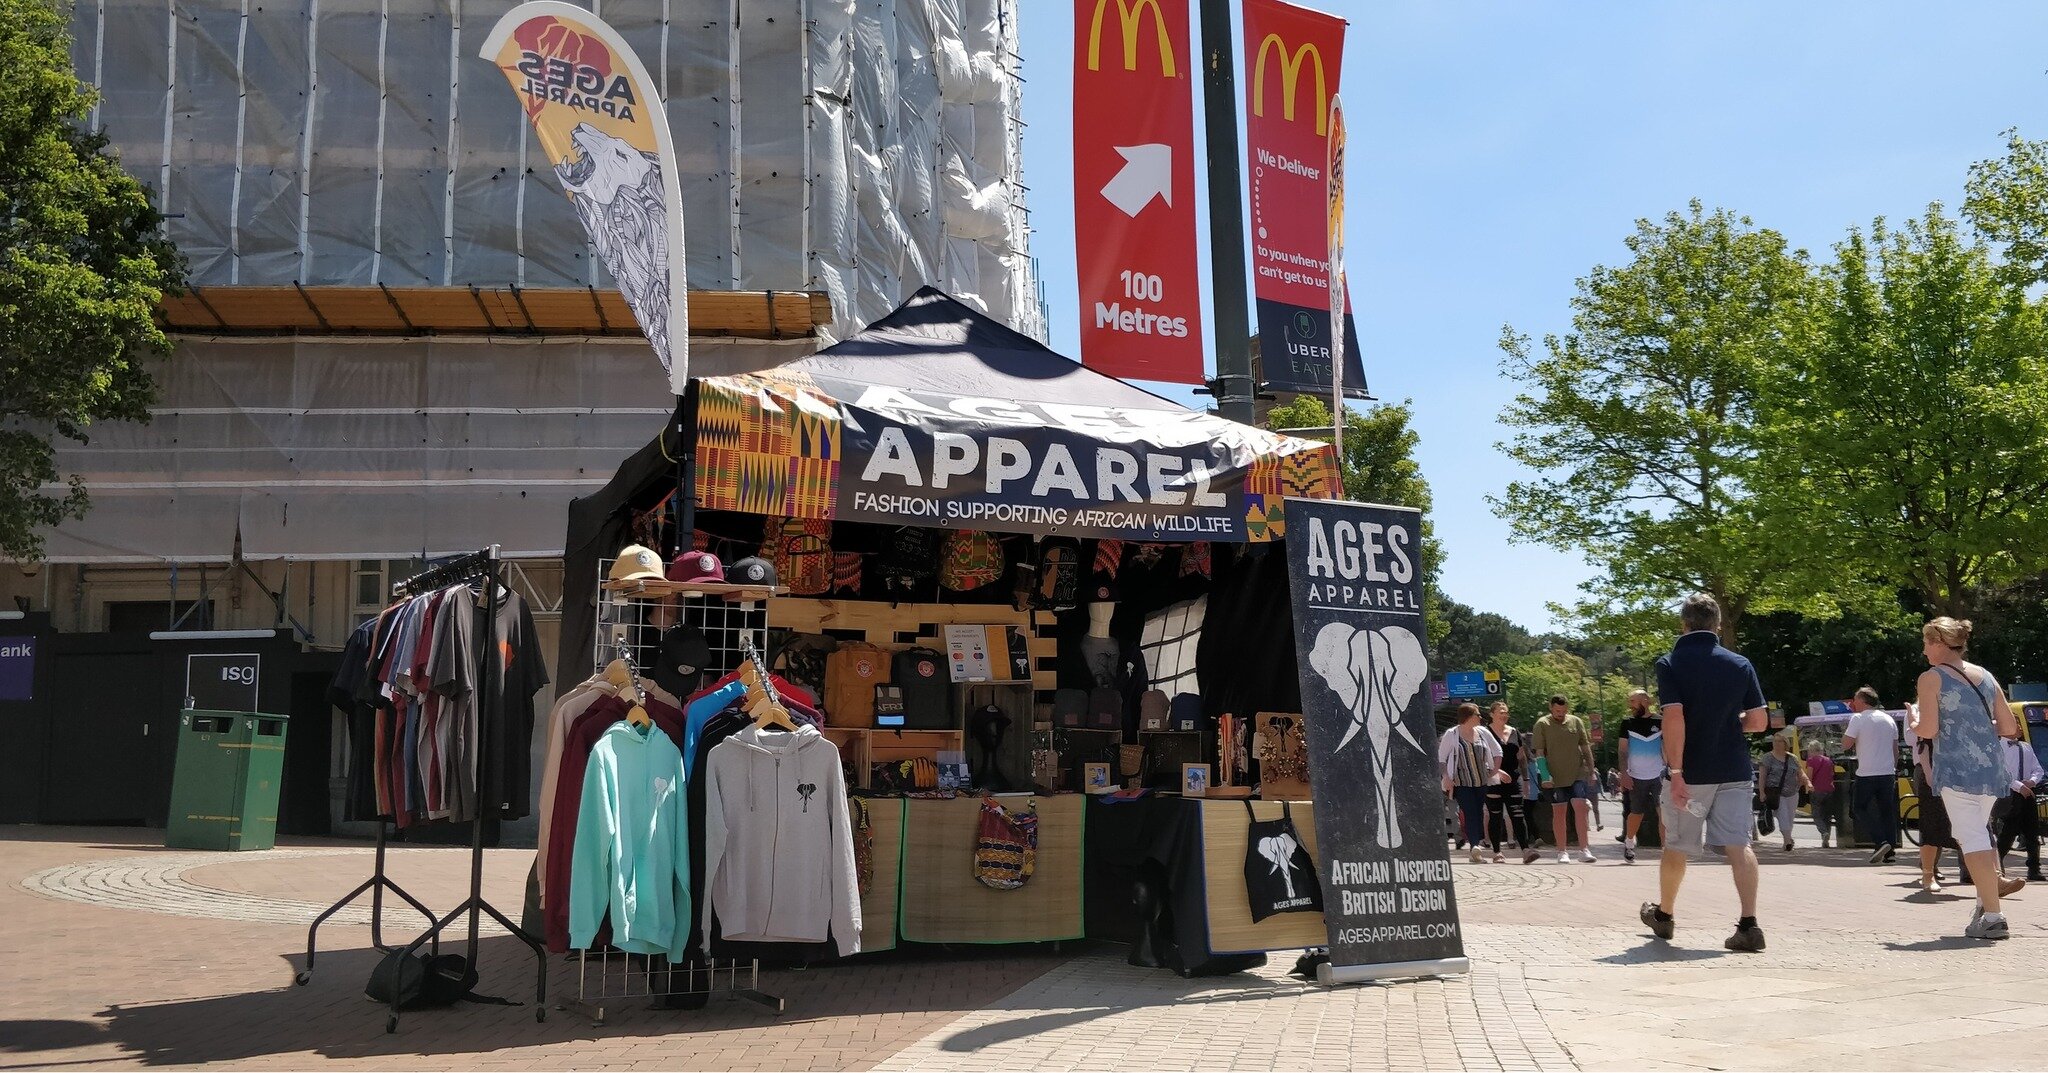 Throwback to when we attended Africa Comes To Bournemouth in Bournemouth square a few year back!

We met lots of people and saw some great entertainment too 😃

 #africaninspired #agesapparel #bournemouth #africacomestobournemouth